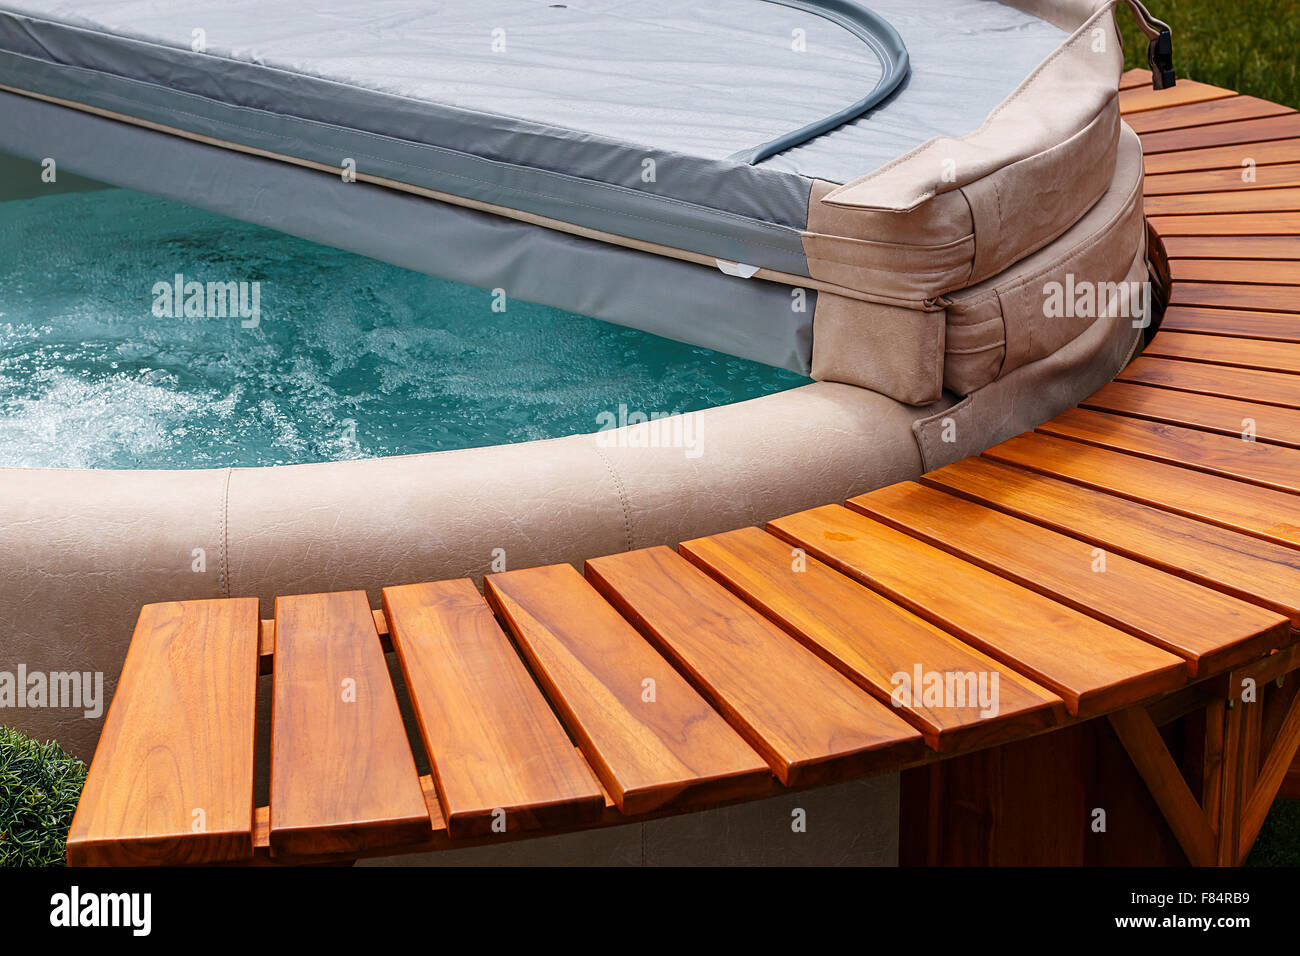 The ultimate garden accessory a free standing cedar wood and leather circular hot tub with cover. Stock Photo